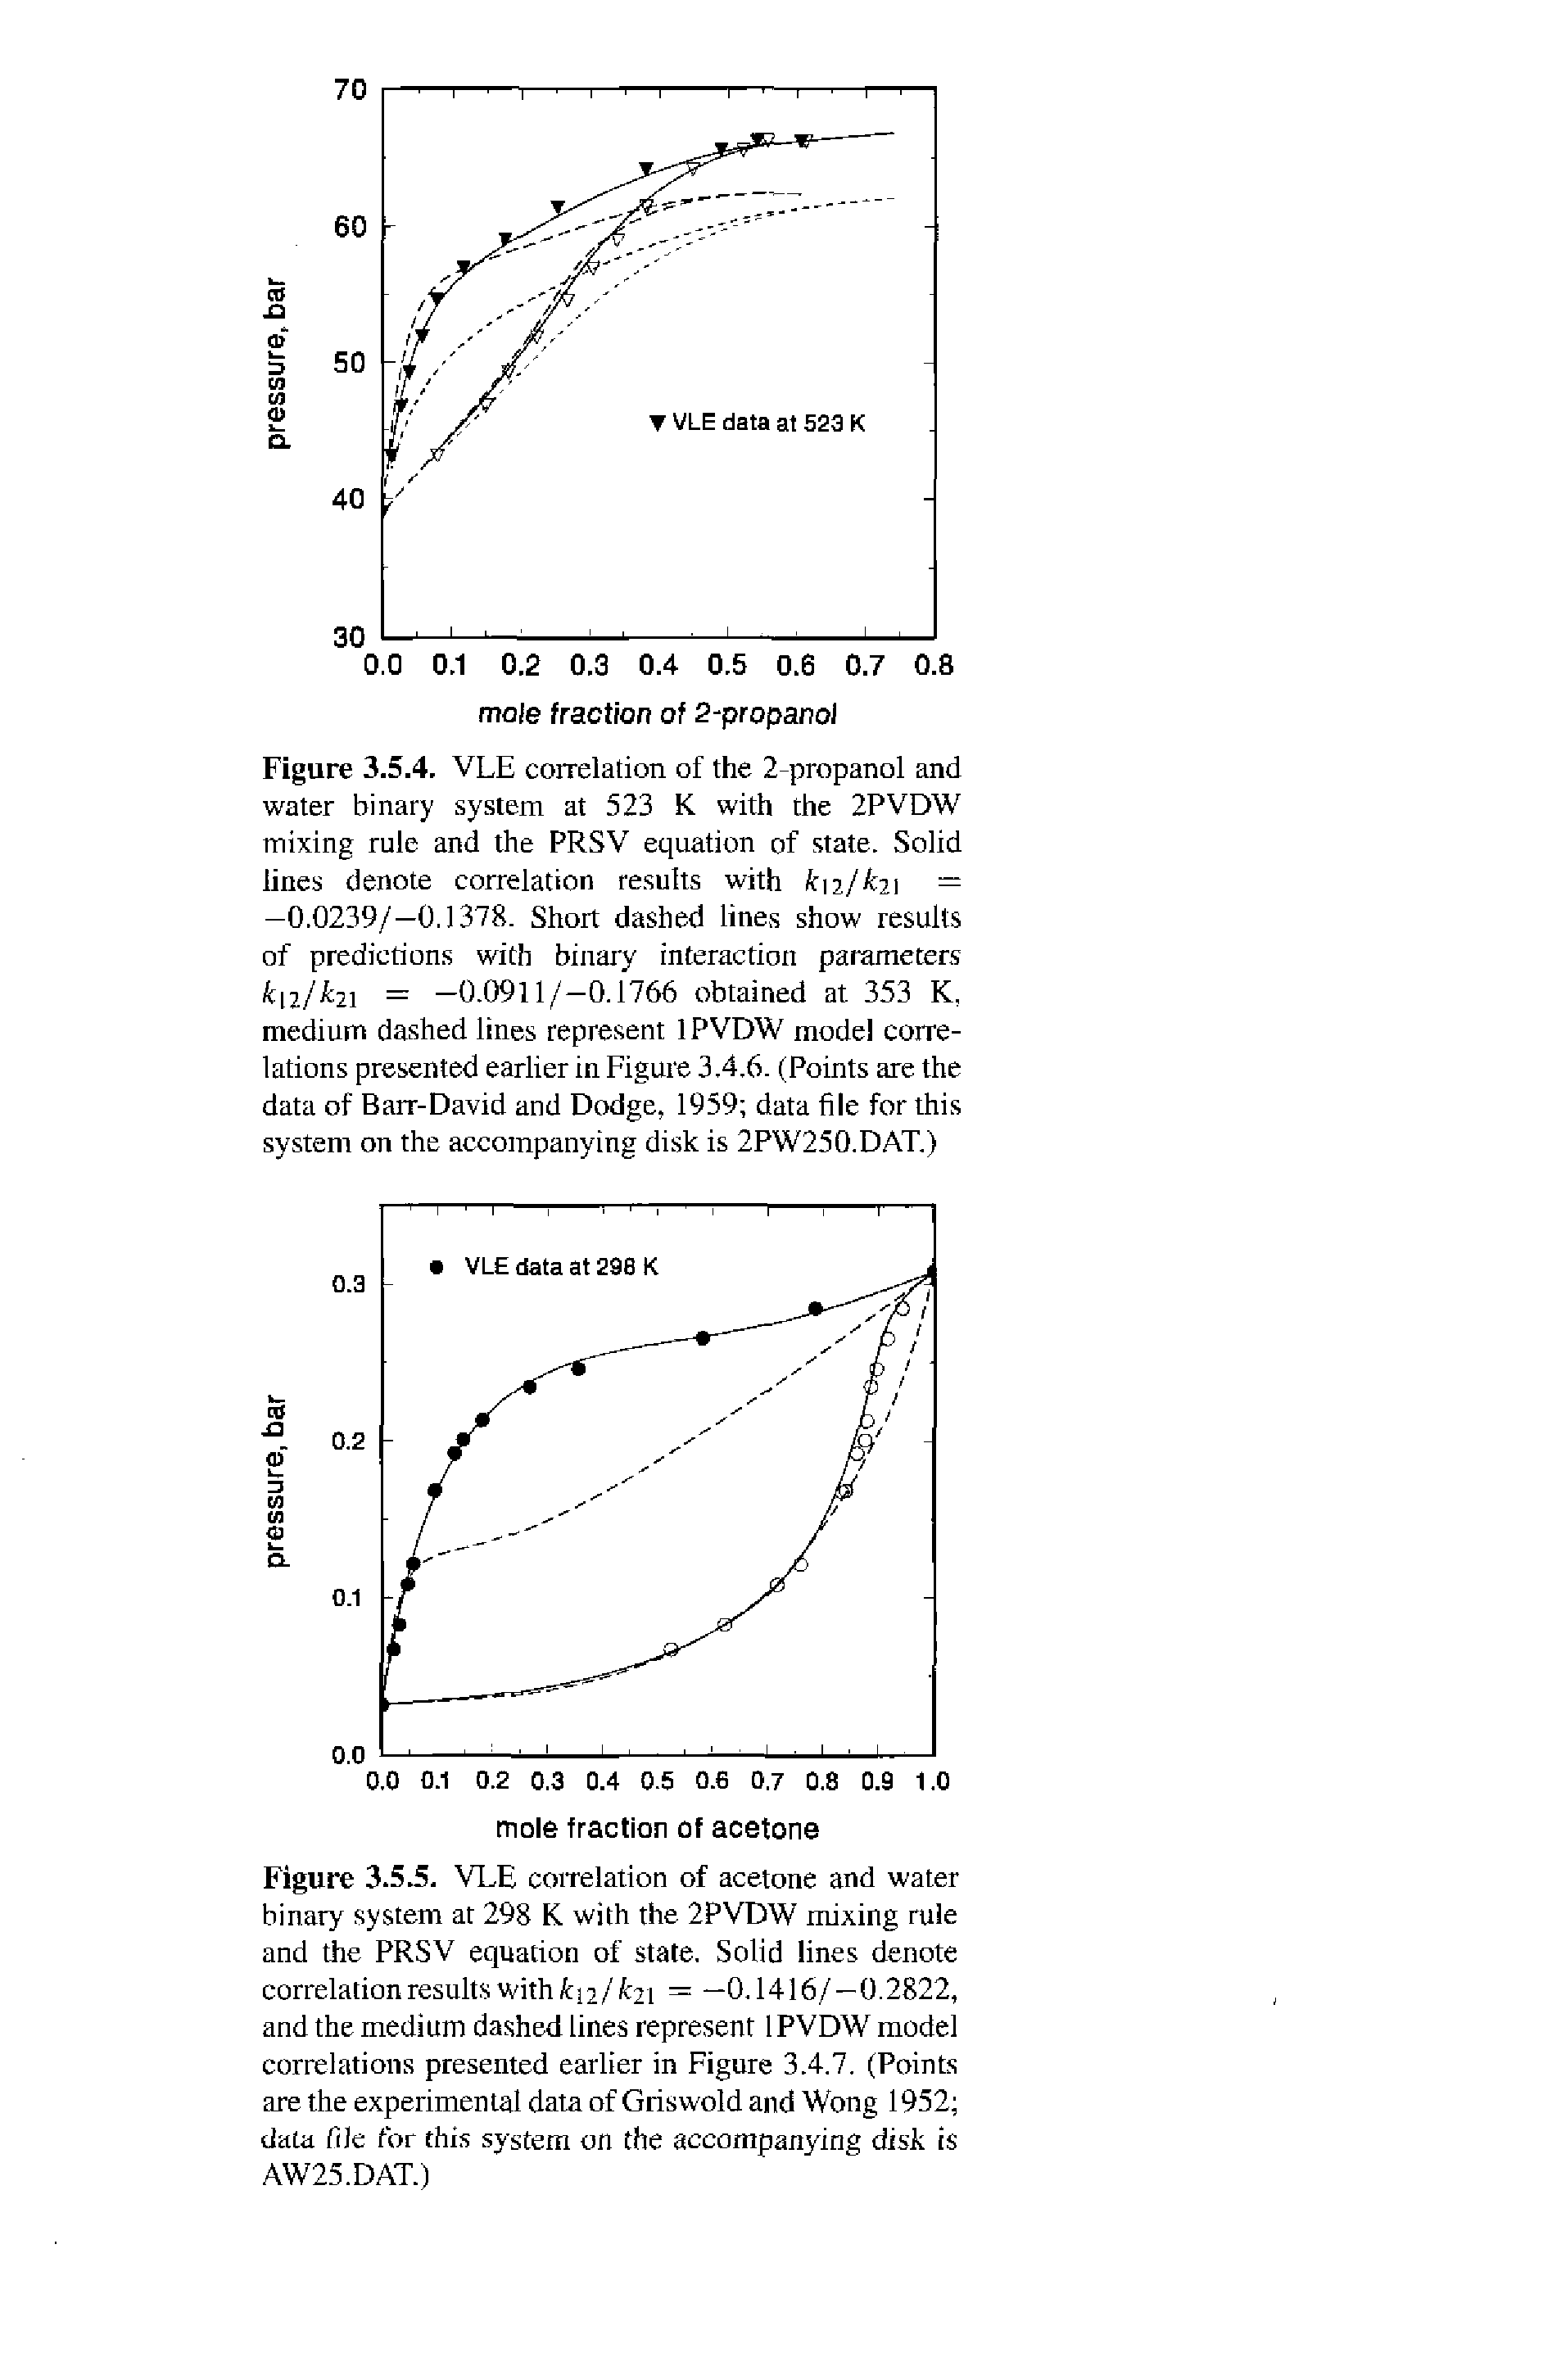 Figure 3.5.5. VLB coiTelation of acetone and water binary system at 298 K with the 2PVDW mixing rule and the PRSV equation of state. Solid lines denote...